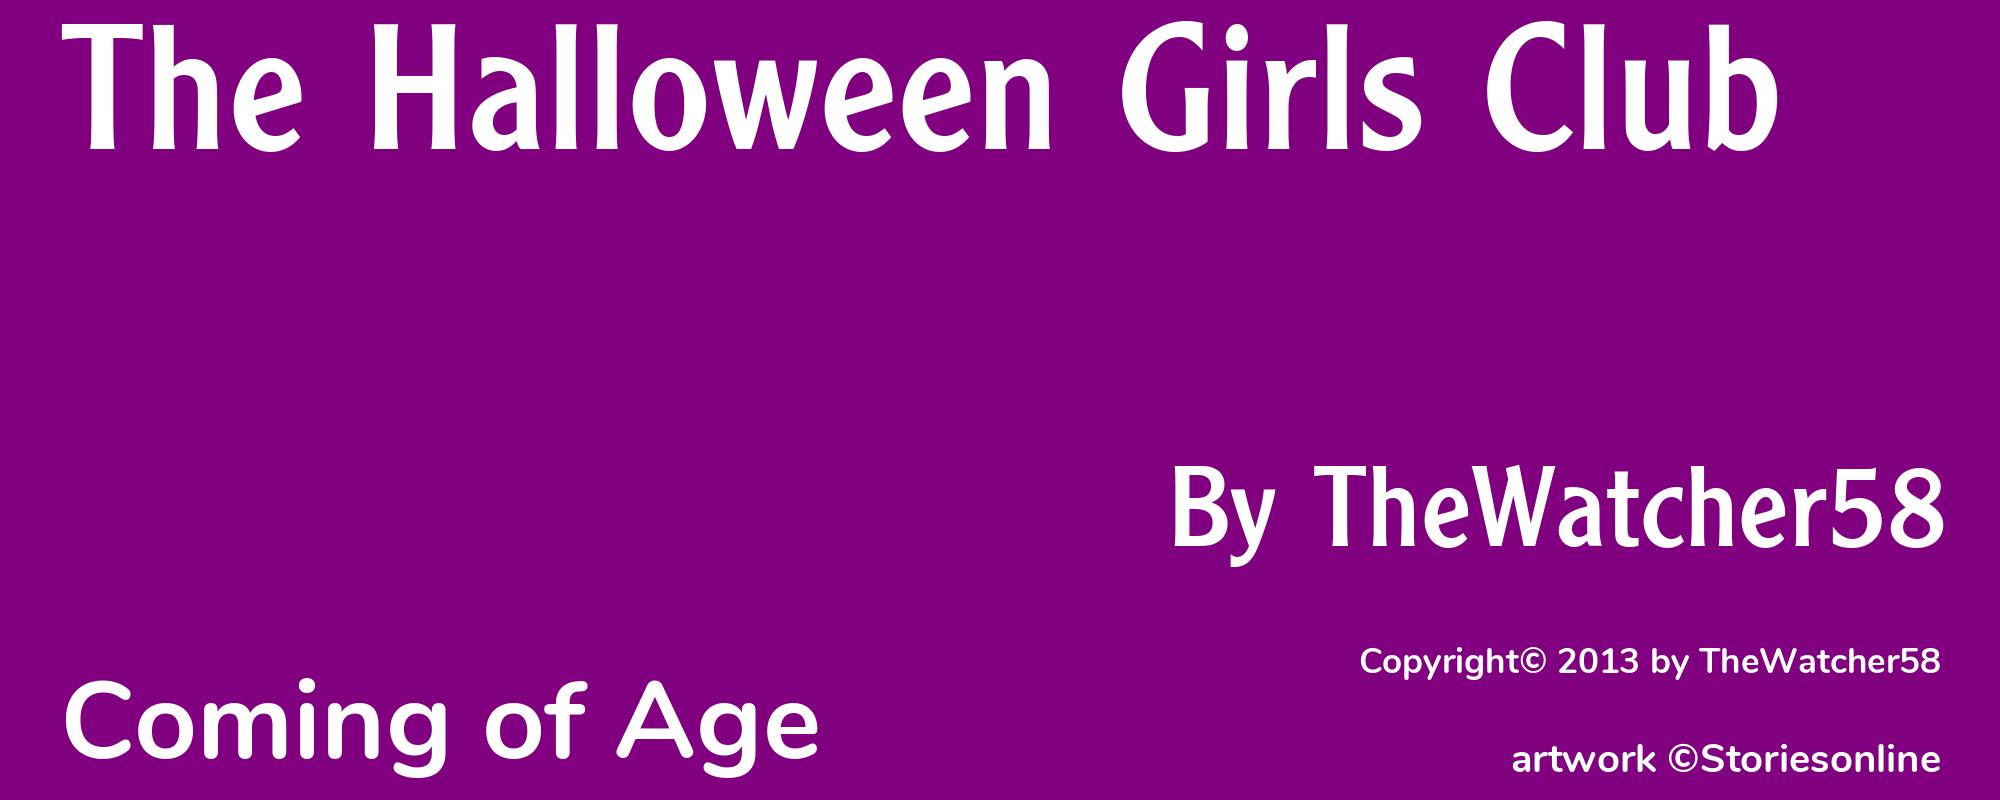 The Halloween Girls Club - Cover